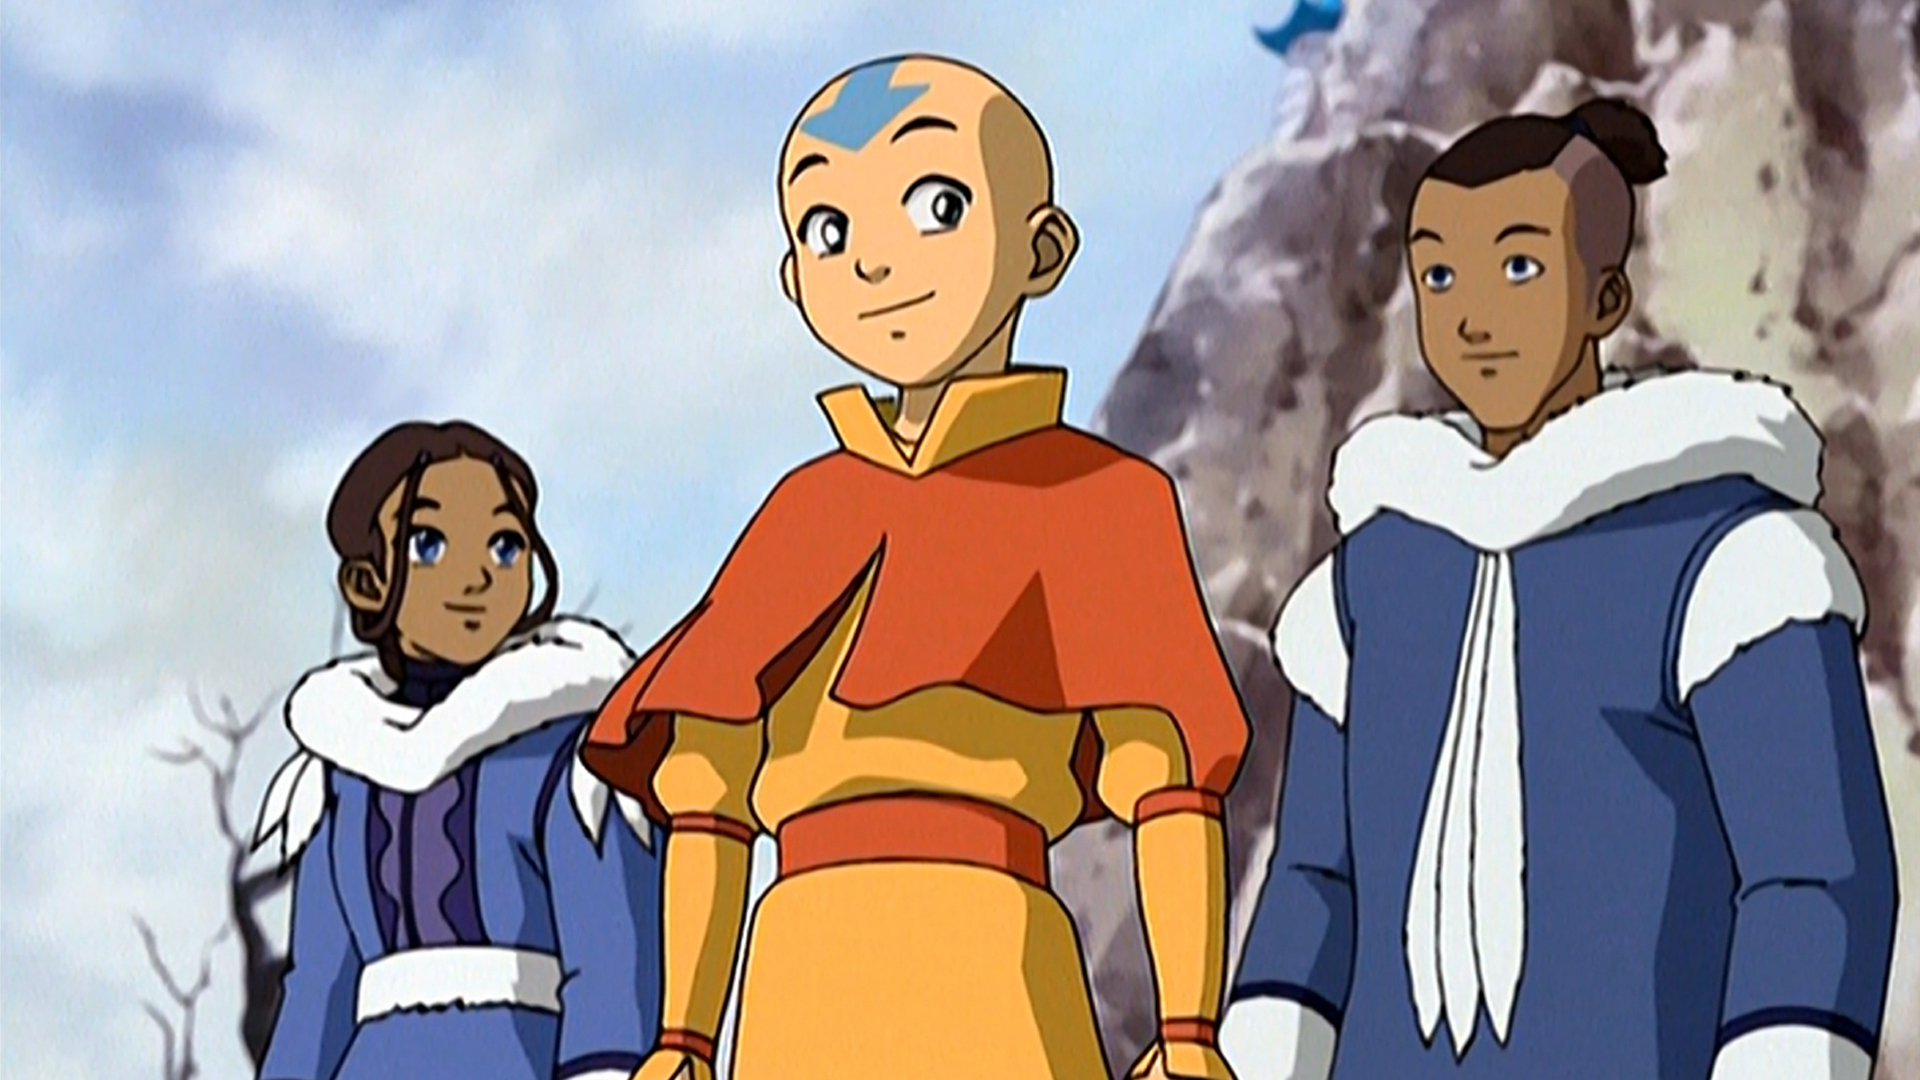 watch-avatar-the-last-airbender-season-1-episode-3-the-southern-air-temple-full-show-on-cbs